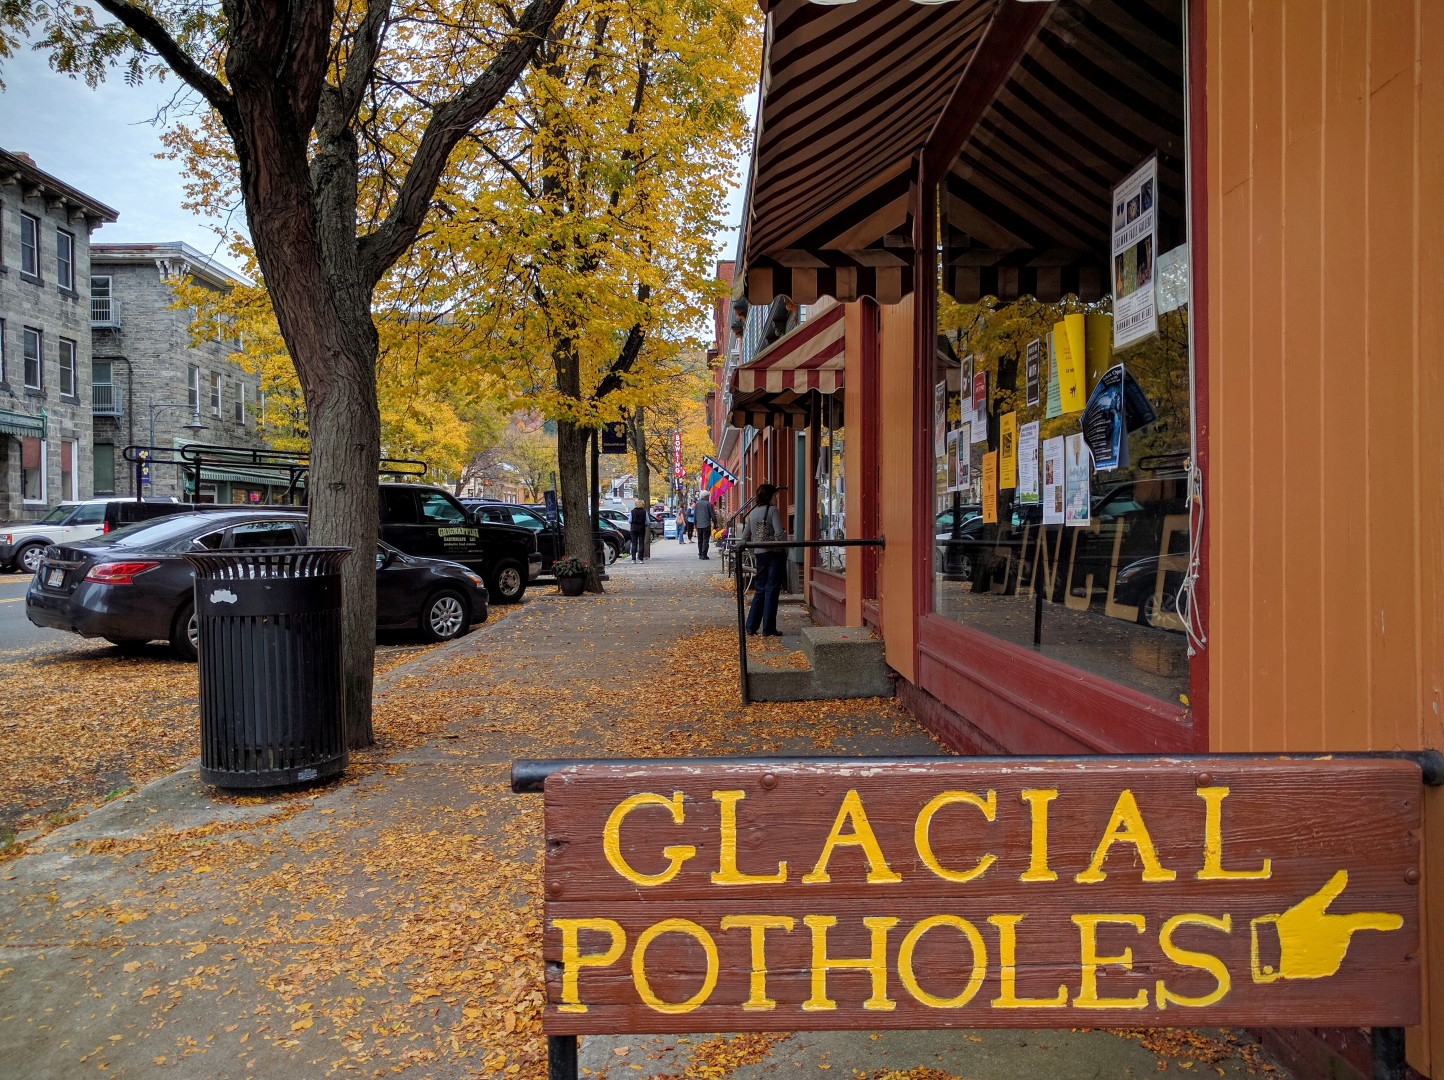 Watch out for Glacial Potholes